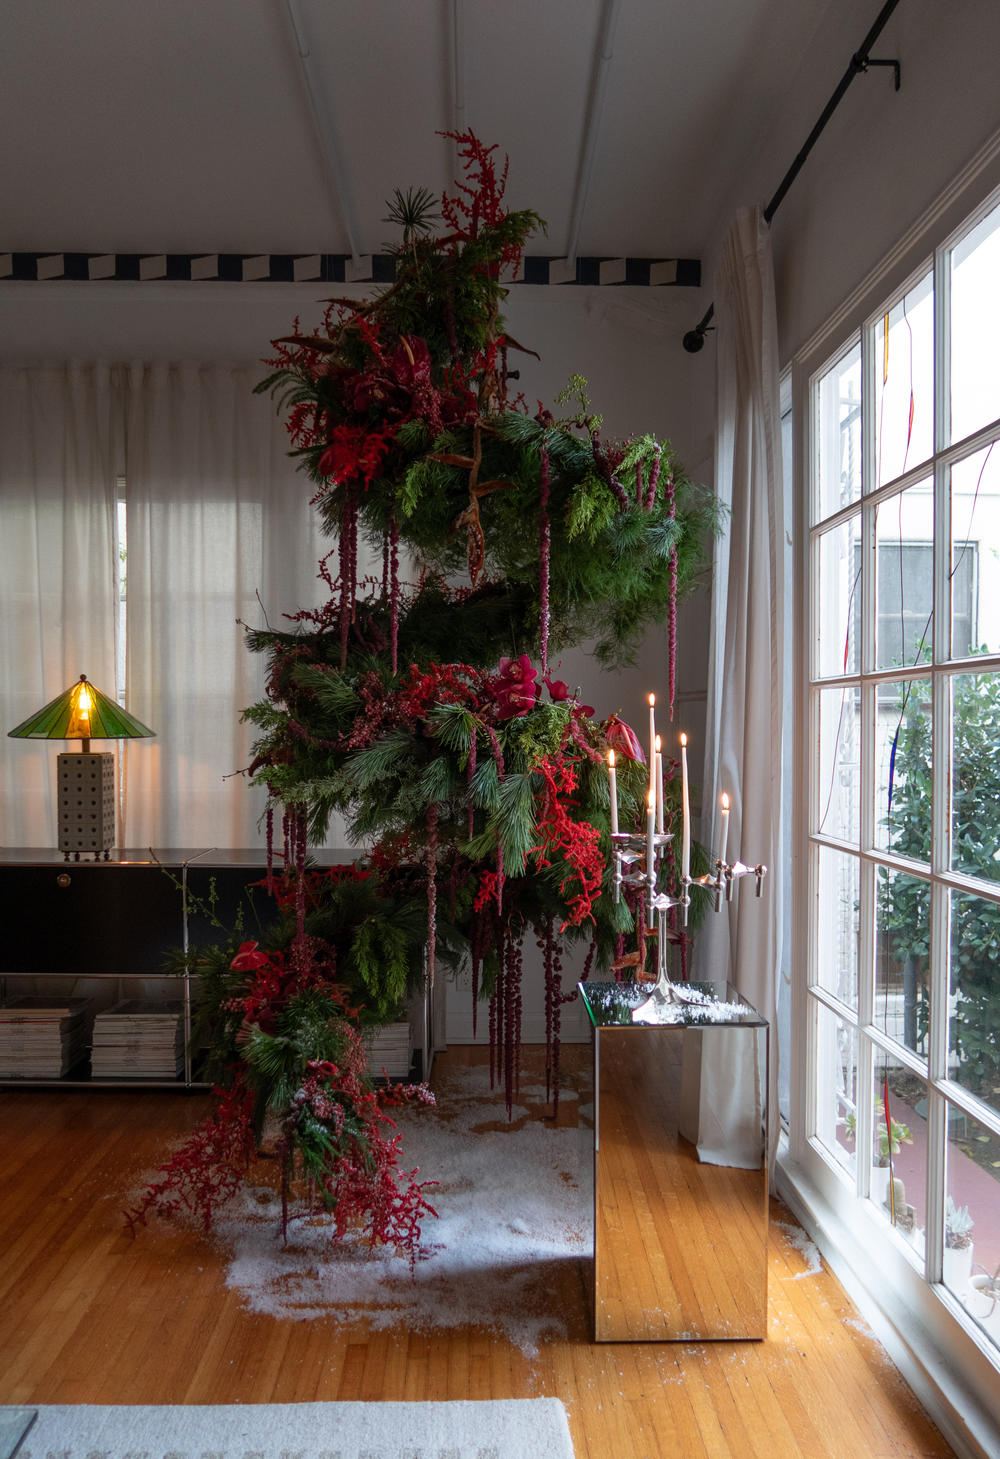 The floating Christmas tree, created by Marco Zamora and Juan Renteria, is suspended from the ceiling with the help of three shower curtain tension rods and fish line.